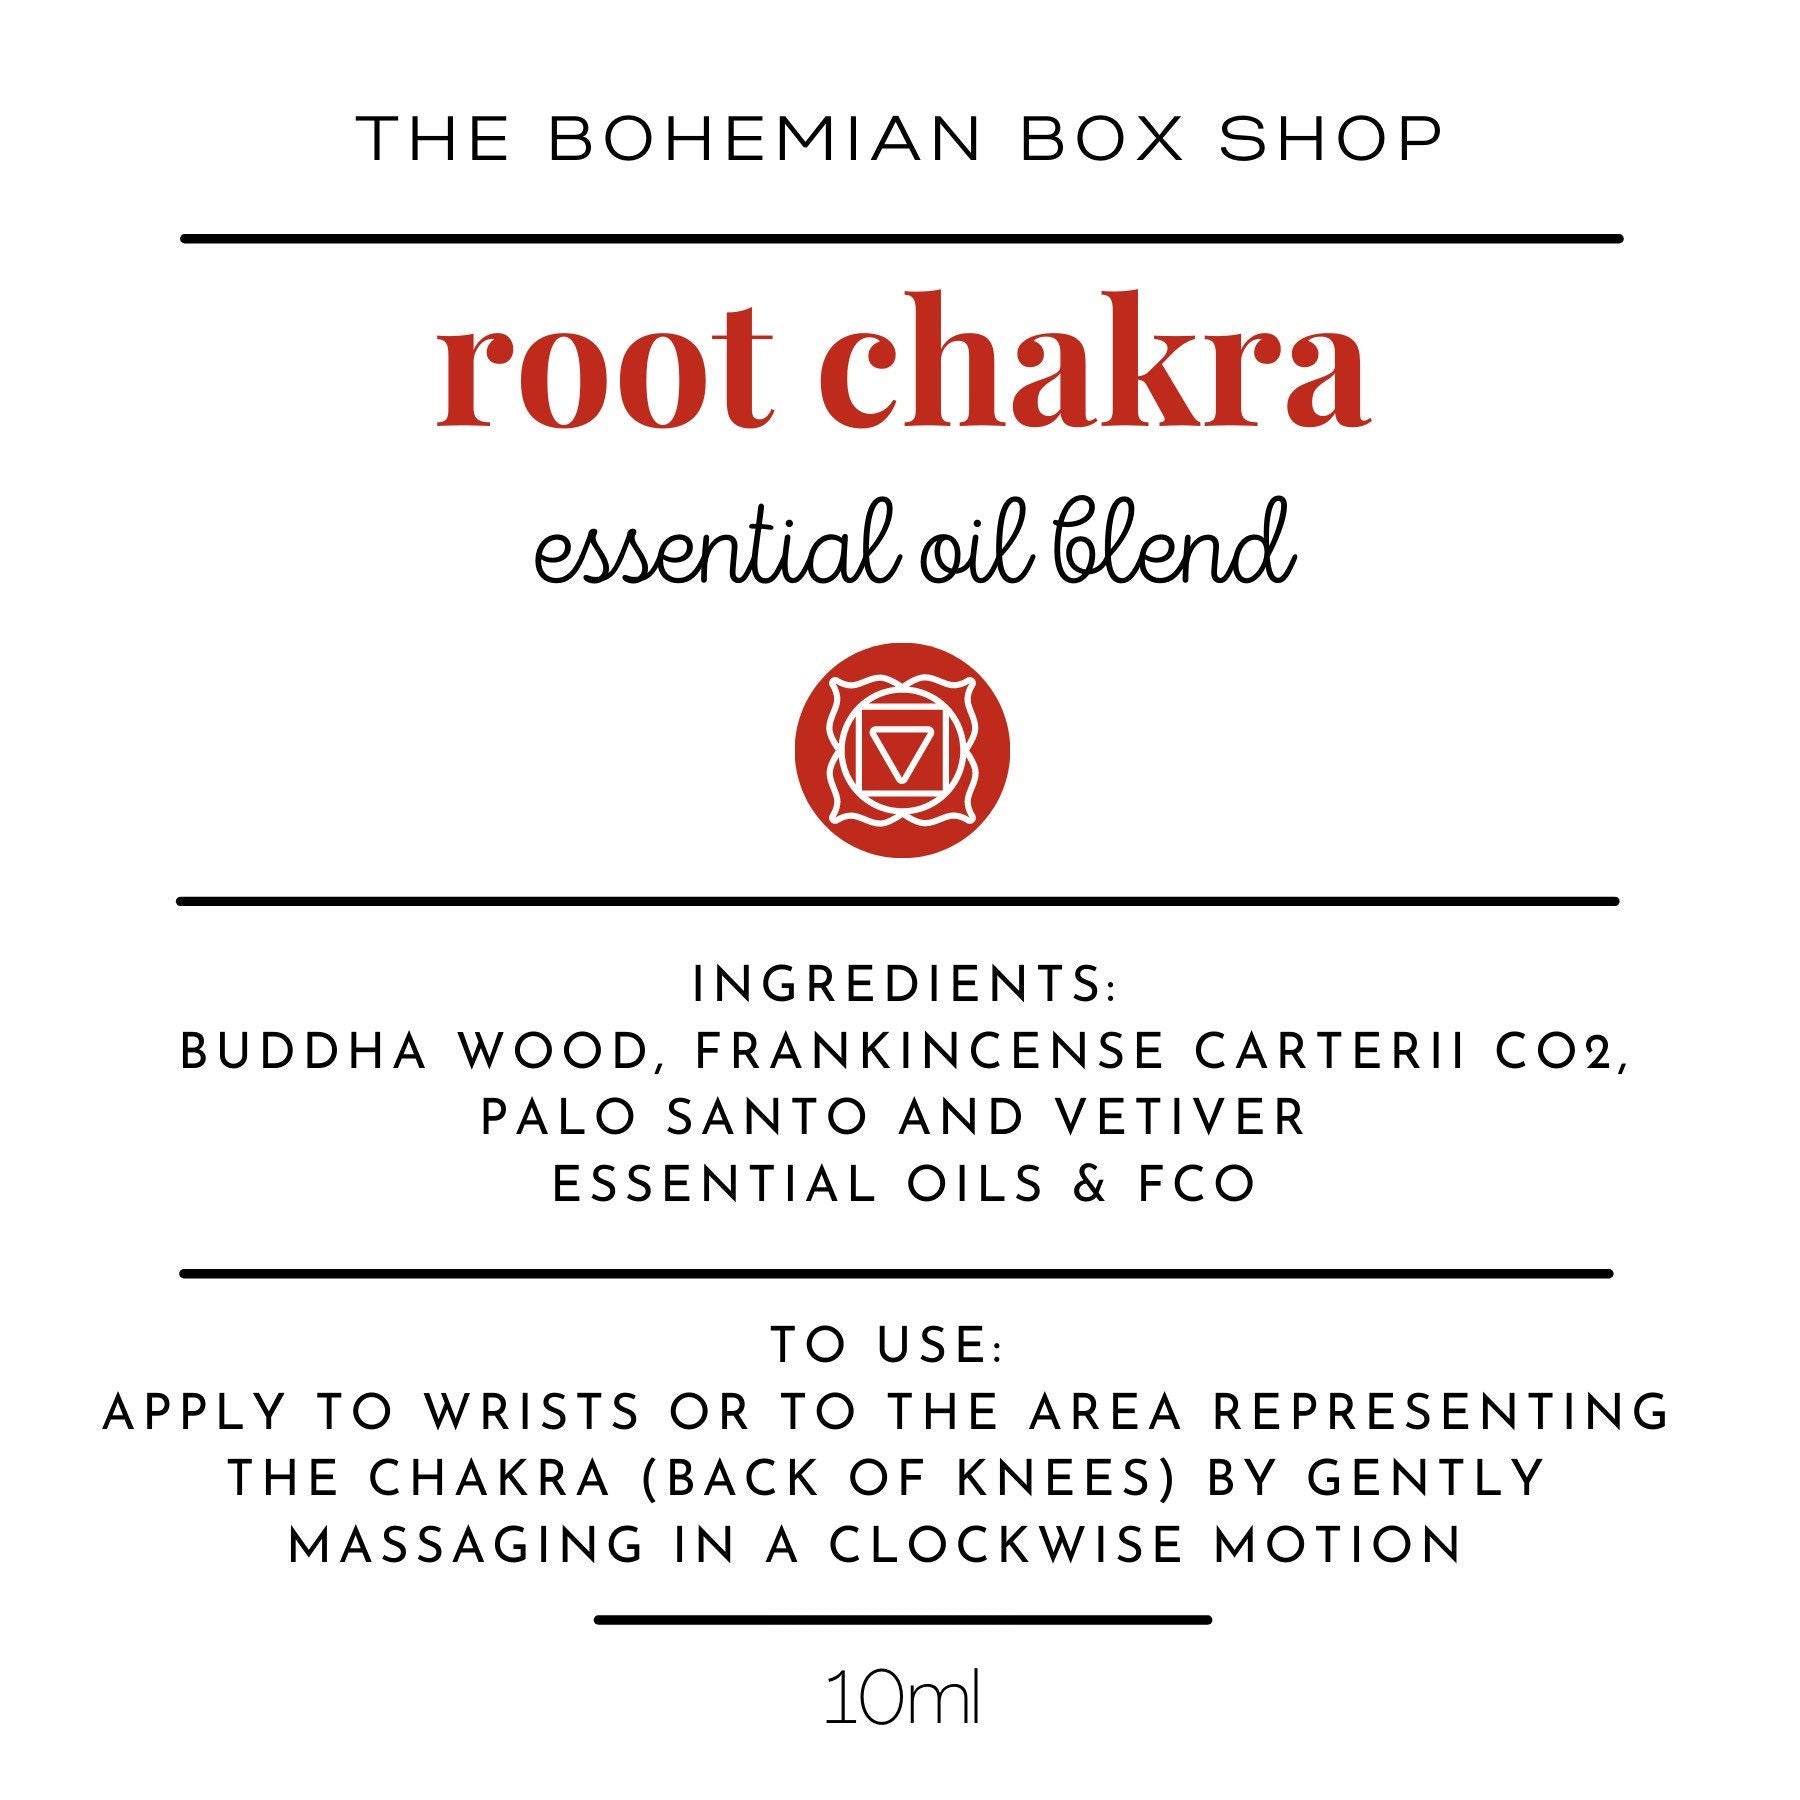 Root chakra essential oil blend ingredients and directions for use ￼